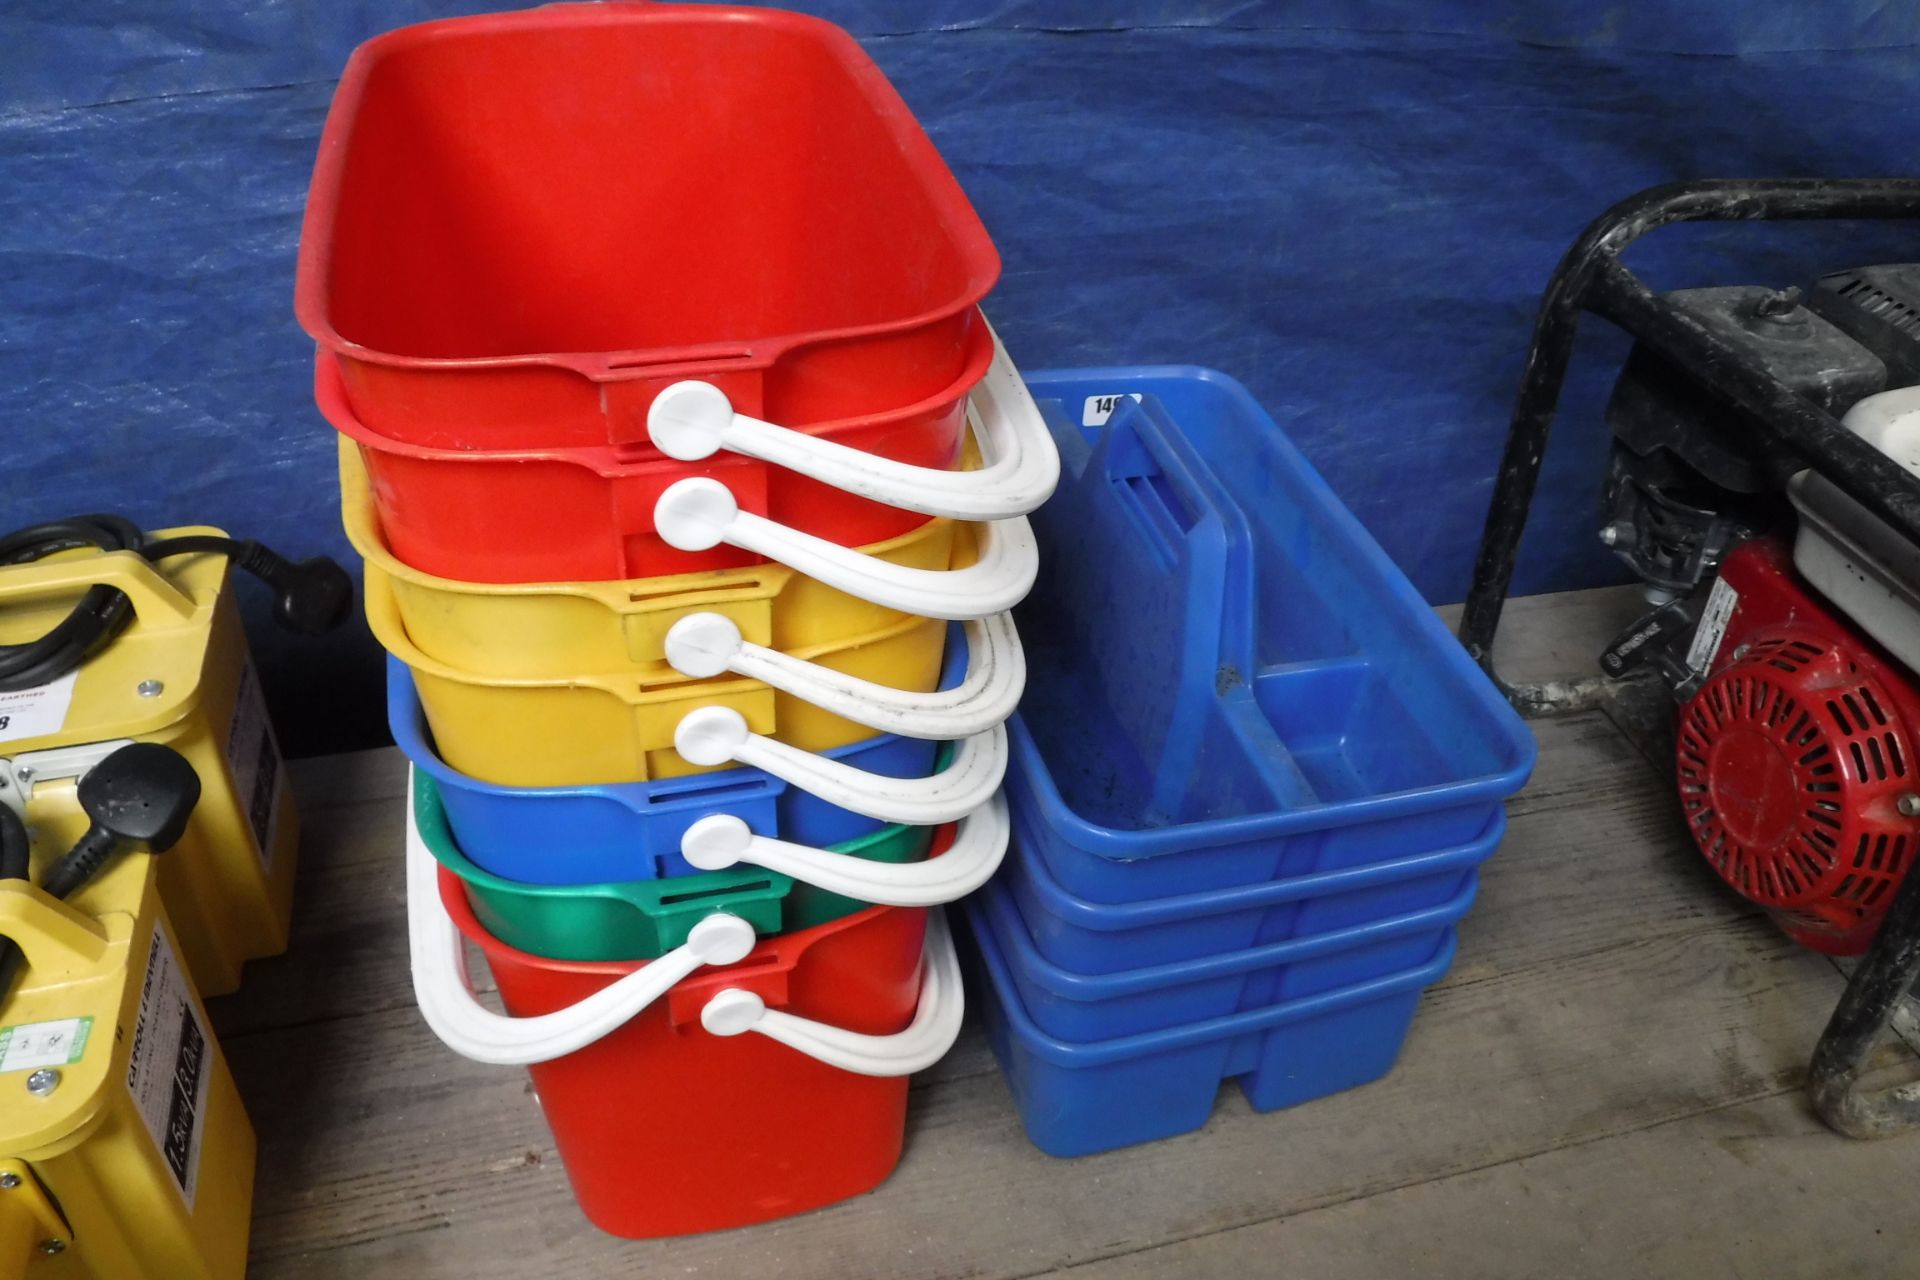 4x Plastic stacking trays with handles and 7x assorted buckets